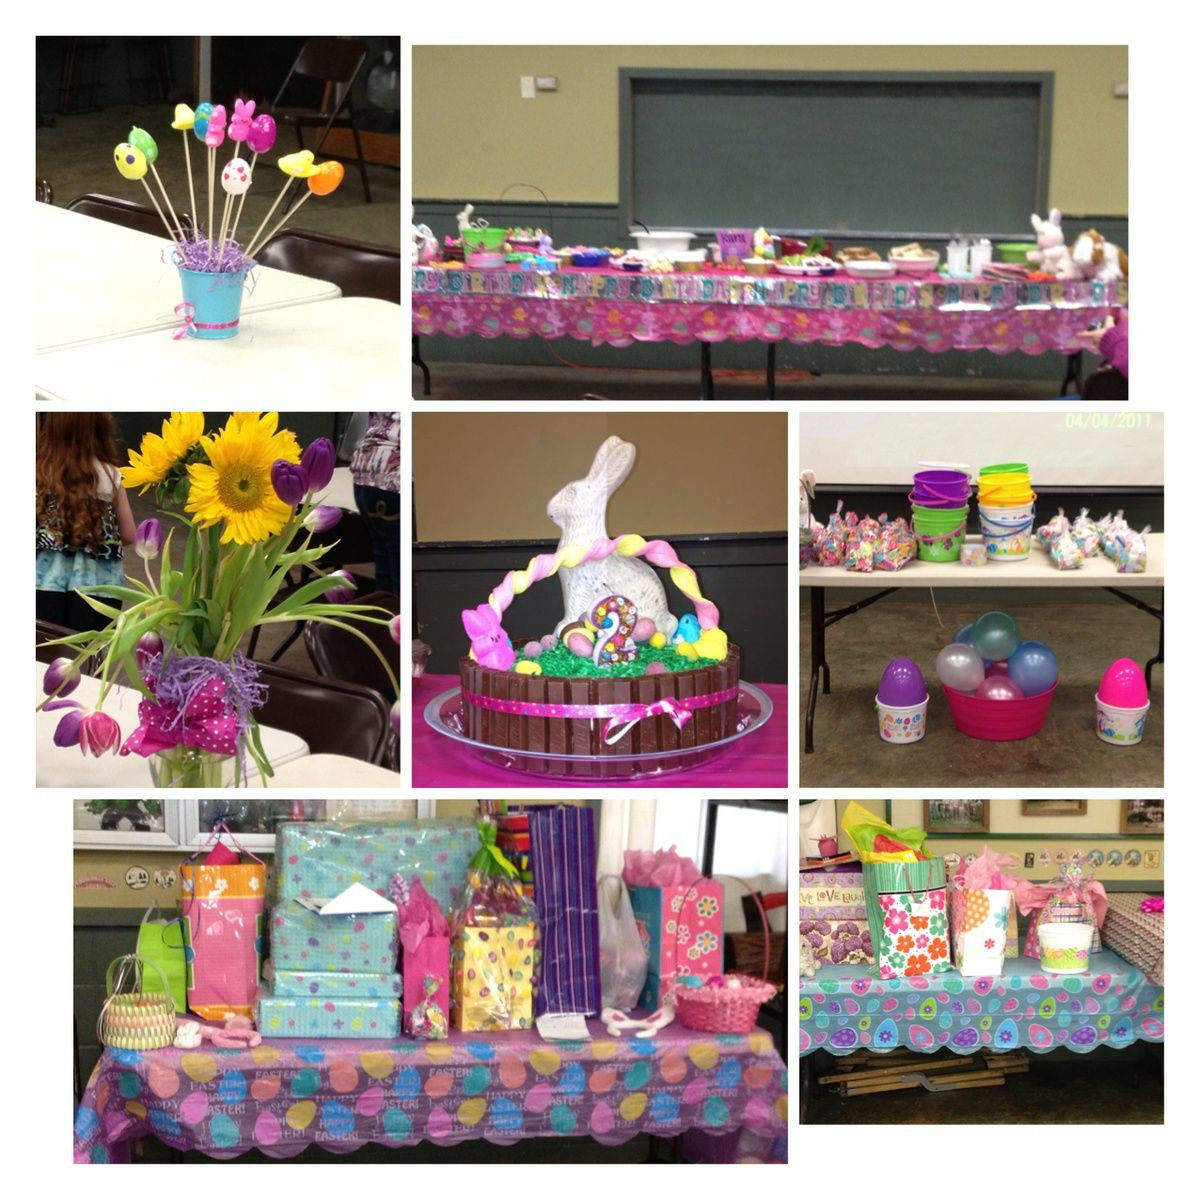 Easter Egg Birthday Party Ideas
 Pin by Amber Robinson on Birthday ideas